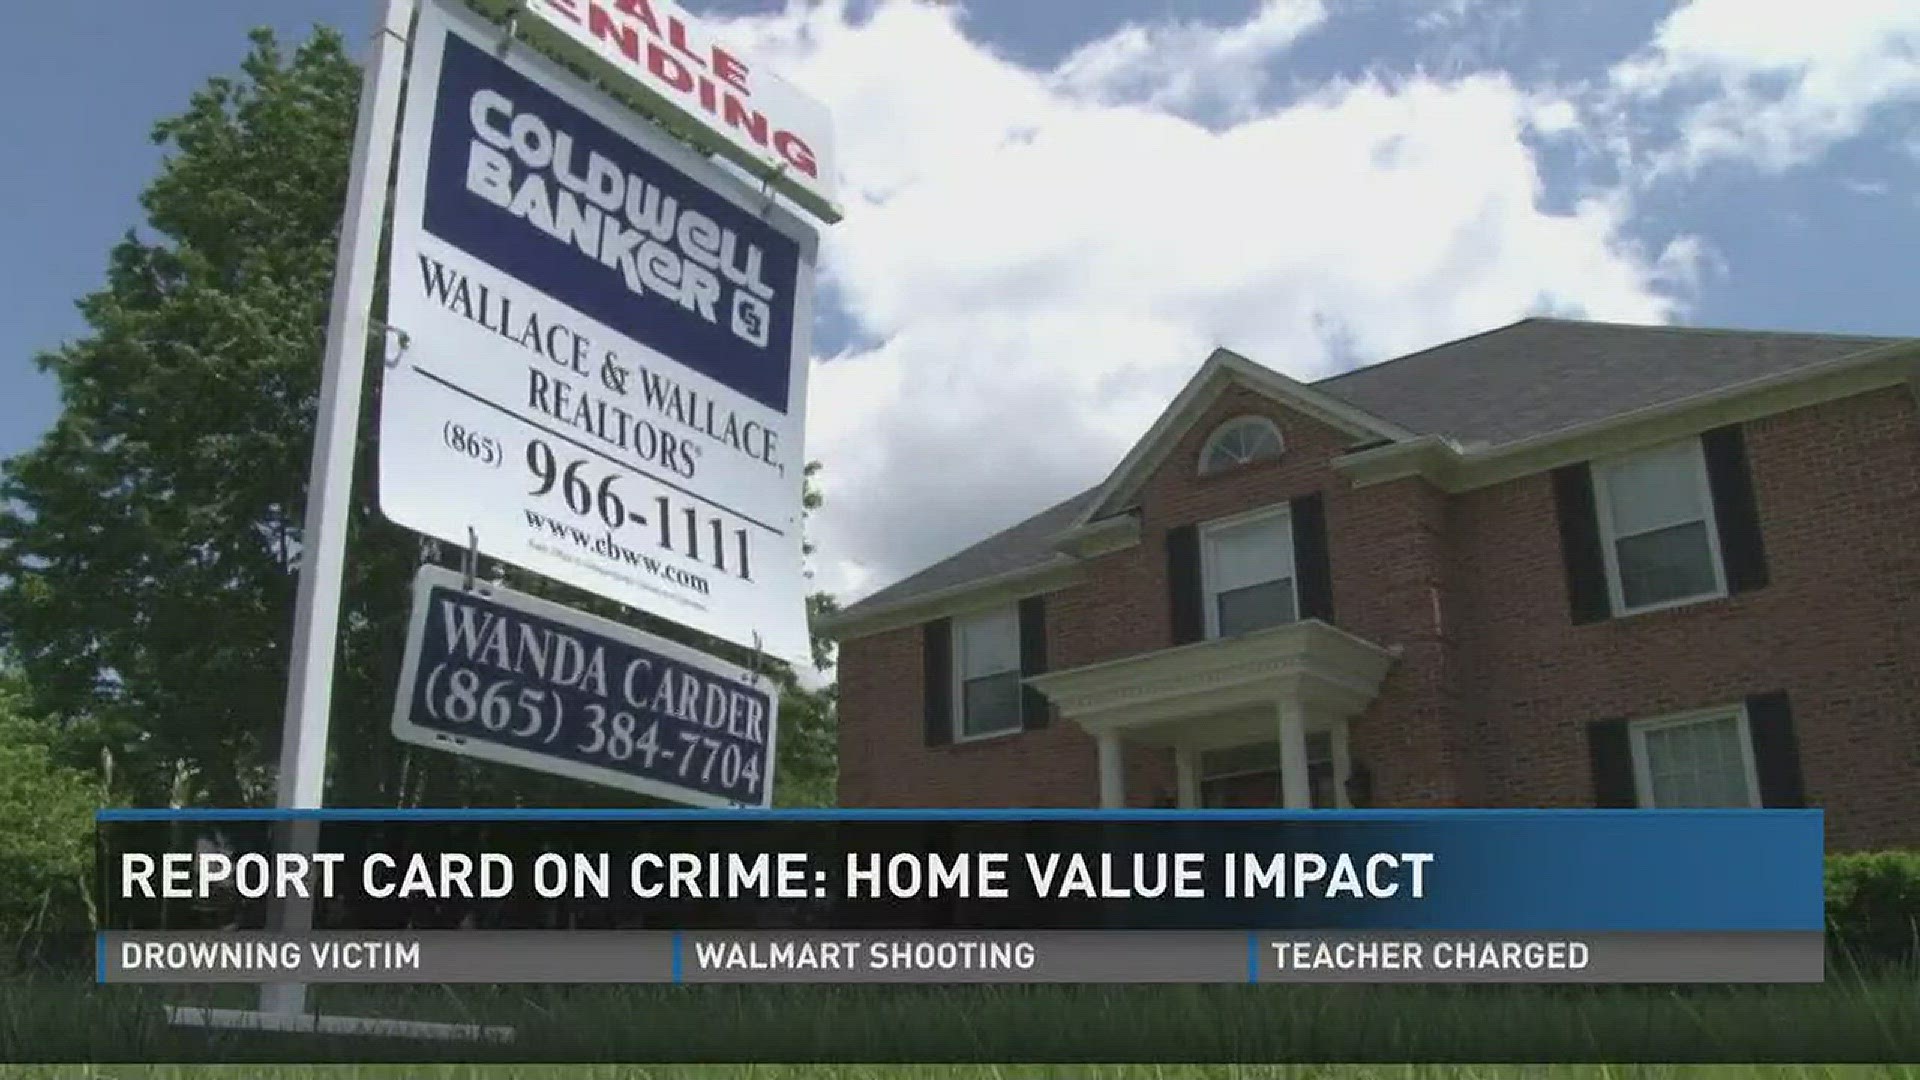 Tonight we look at how crime numbers impact the value of homes.